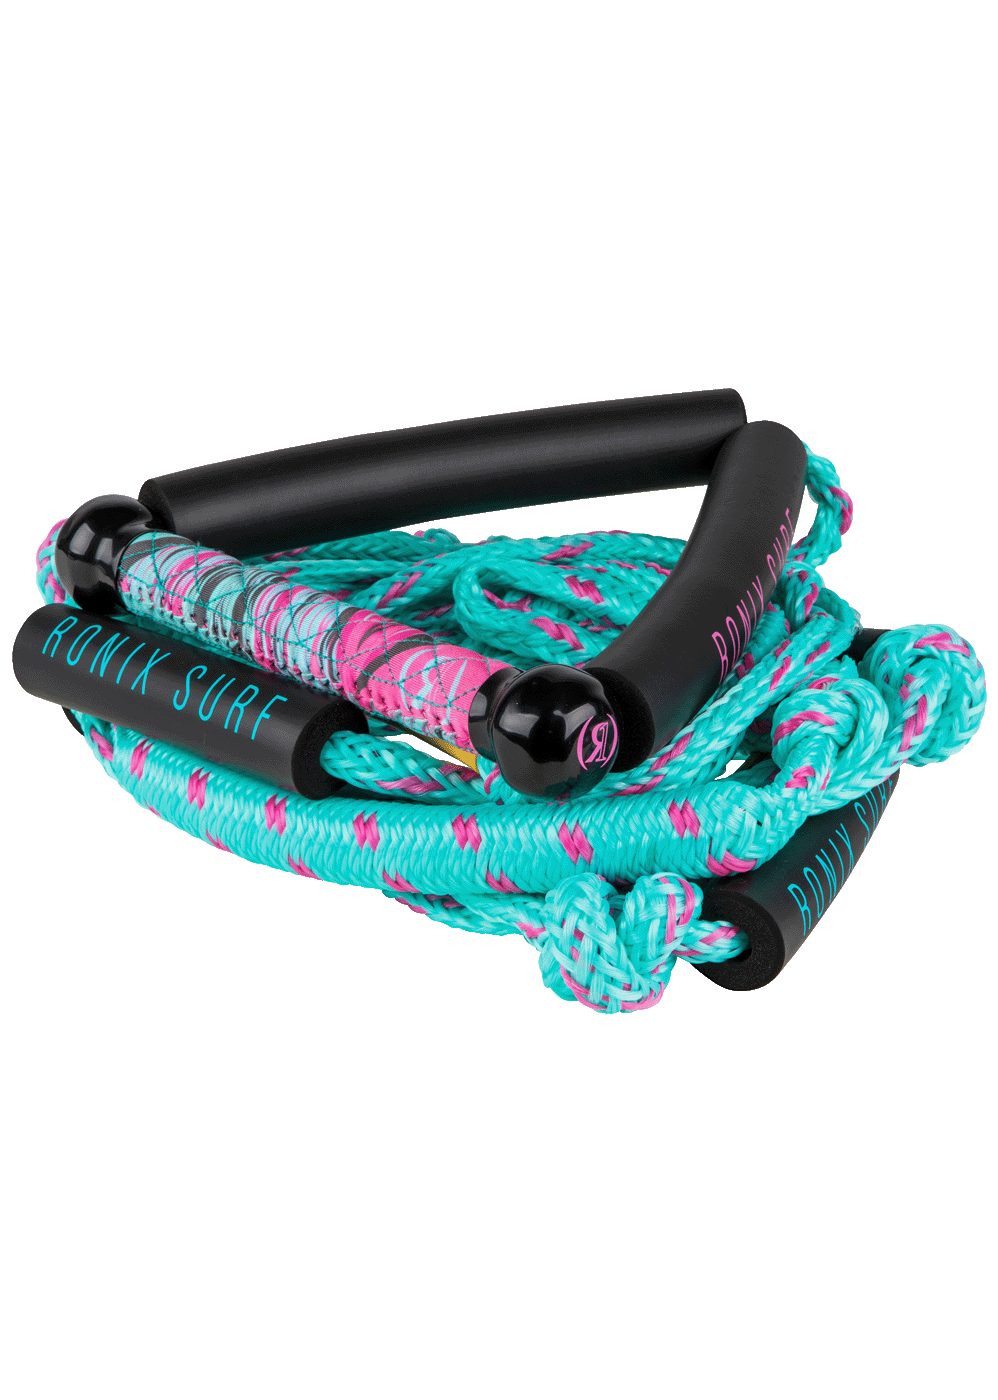 Women’s Stretch Surf Rope / Handle